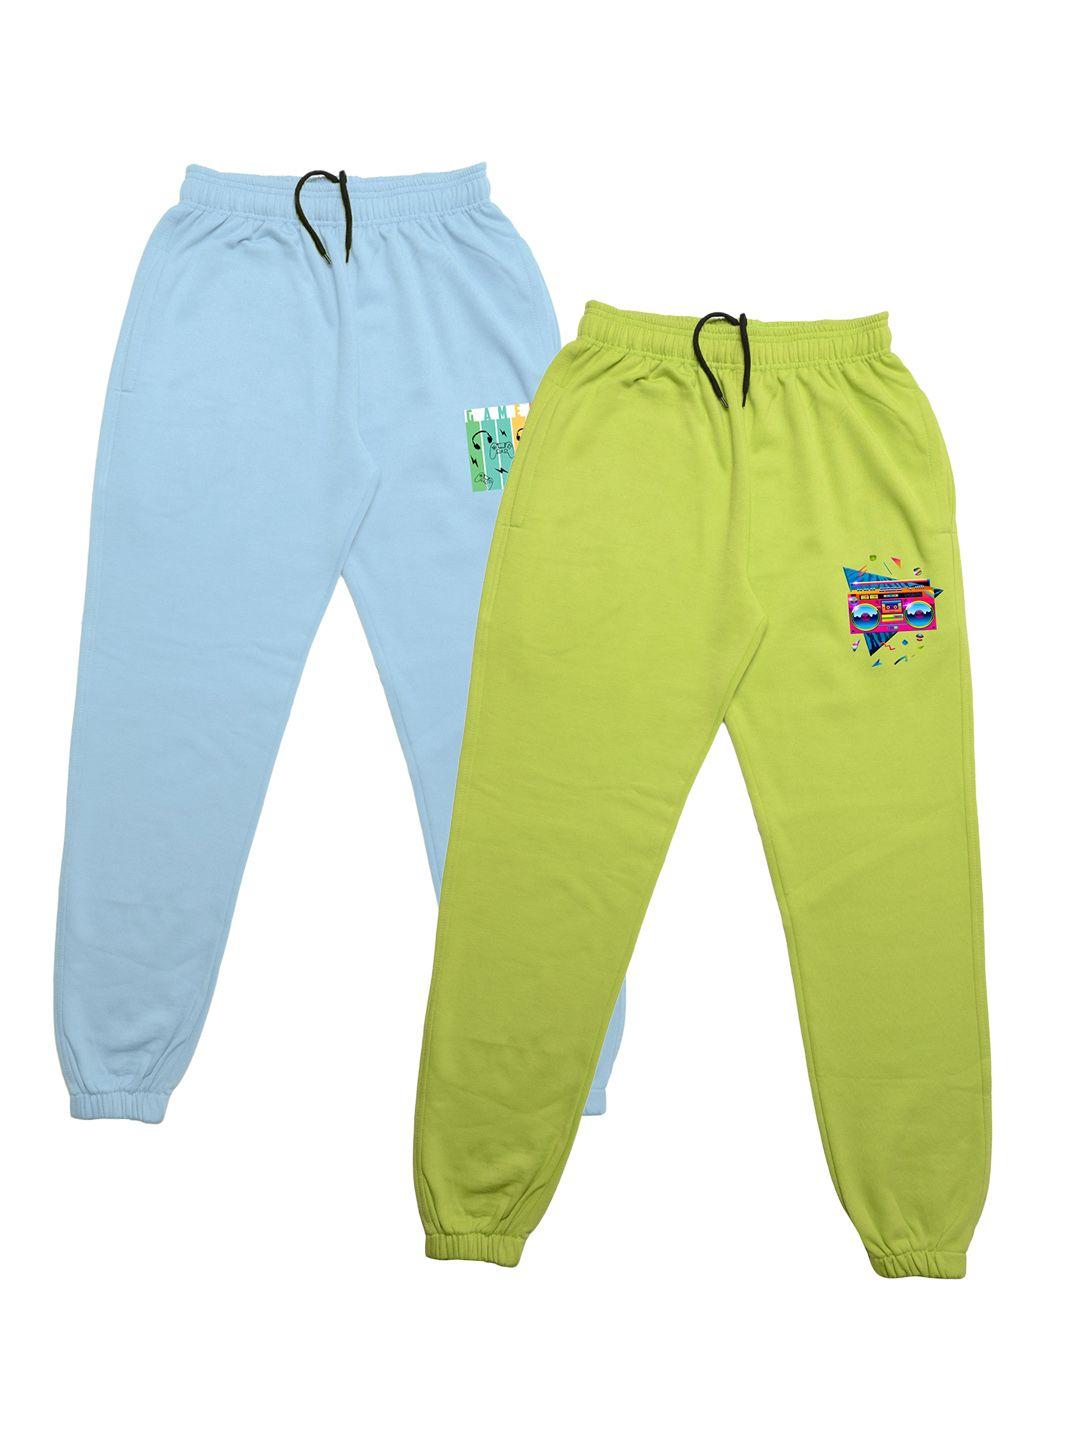 tiny hug boys pack of 2 fluorescent green & blue solid joggers